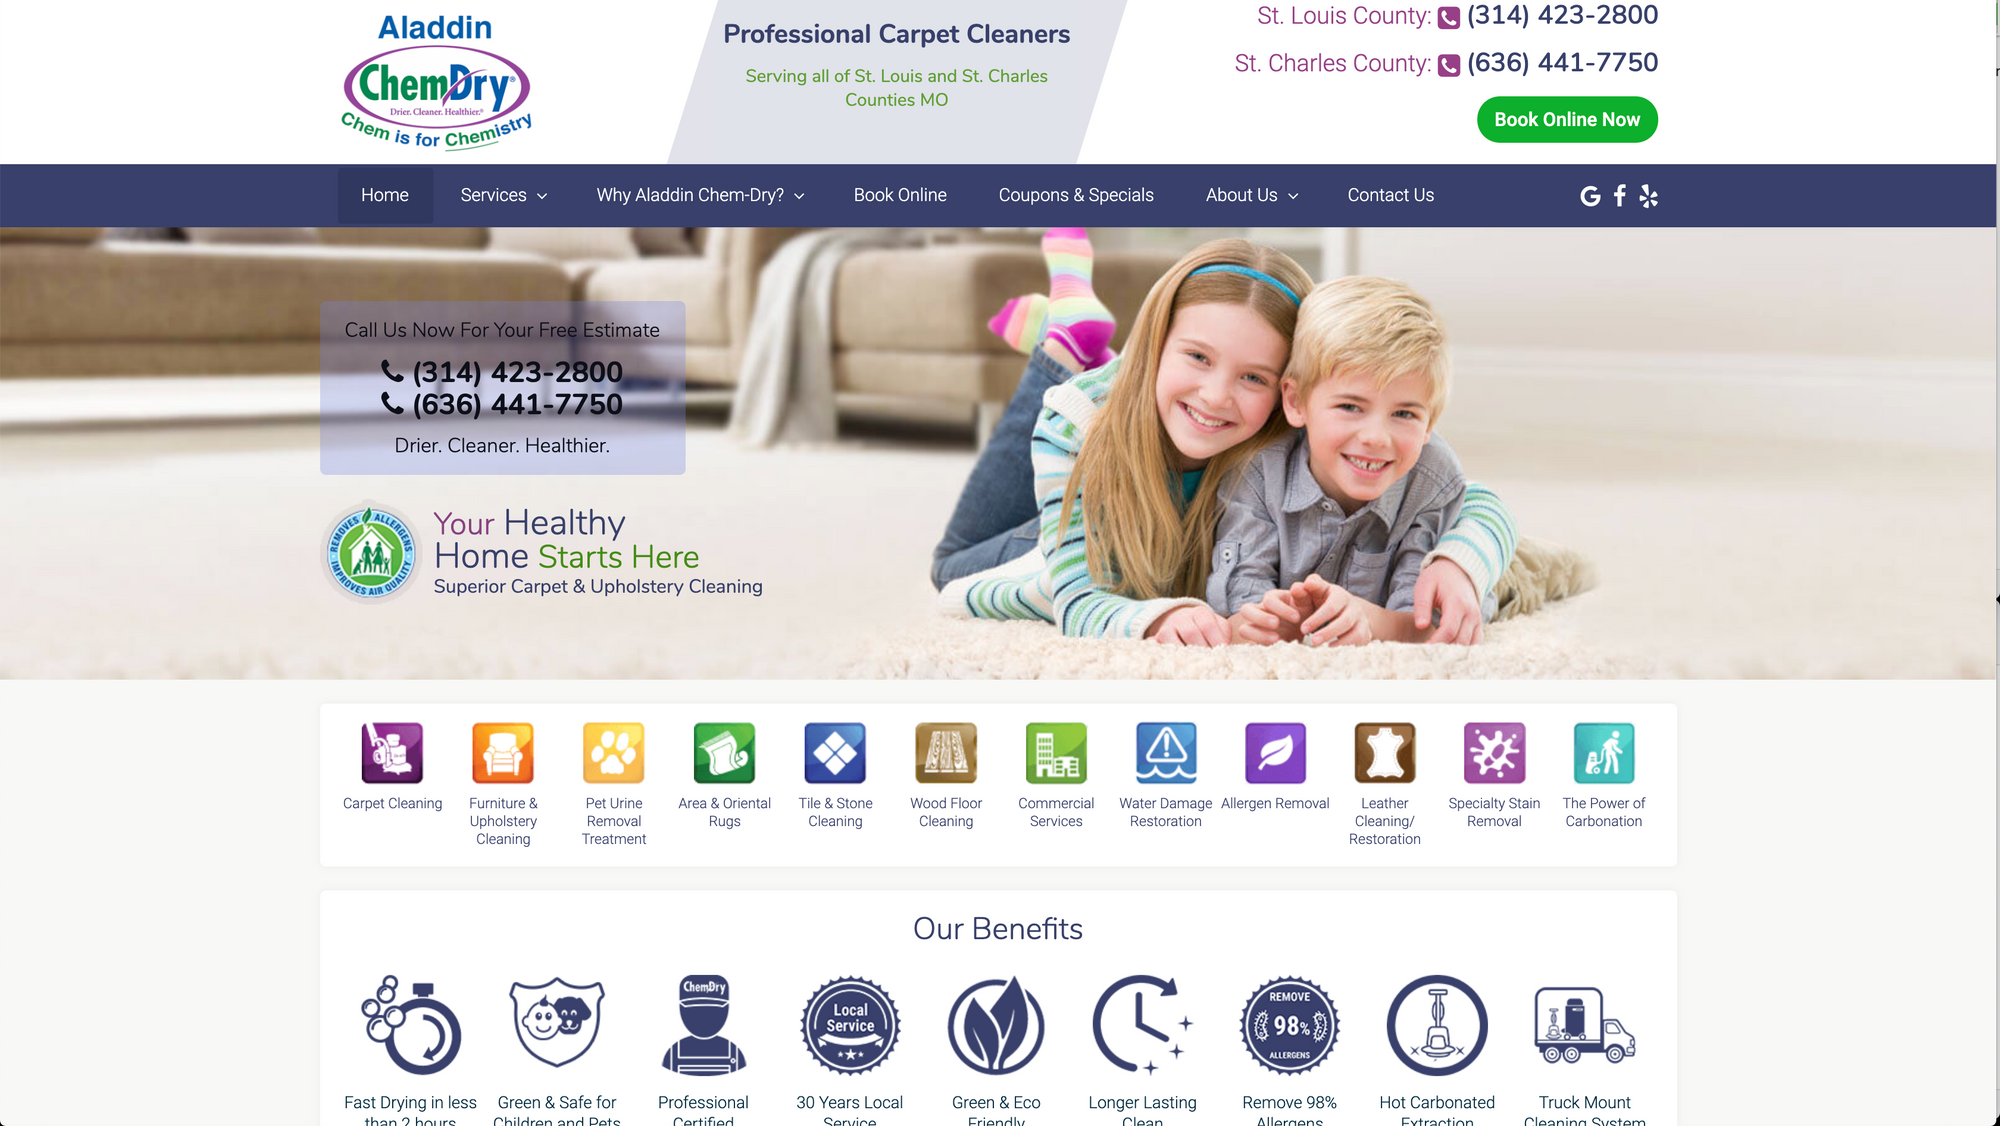 ChemDry Carpet Cleaning